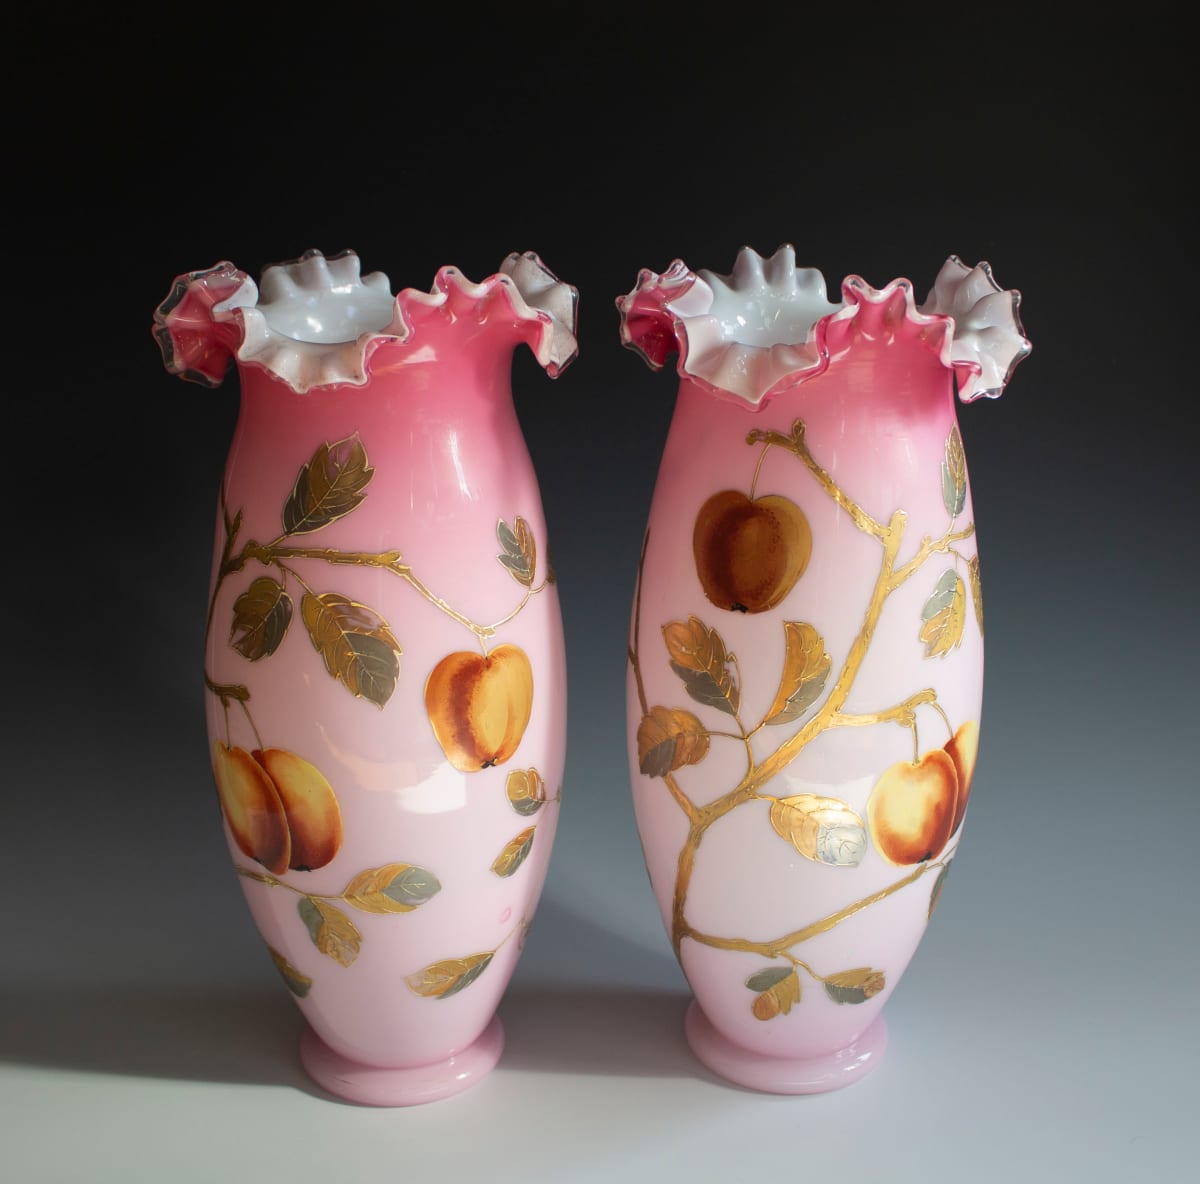 Vases (Set of Two) by Harrach 